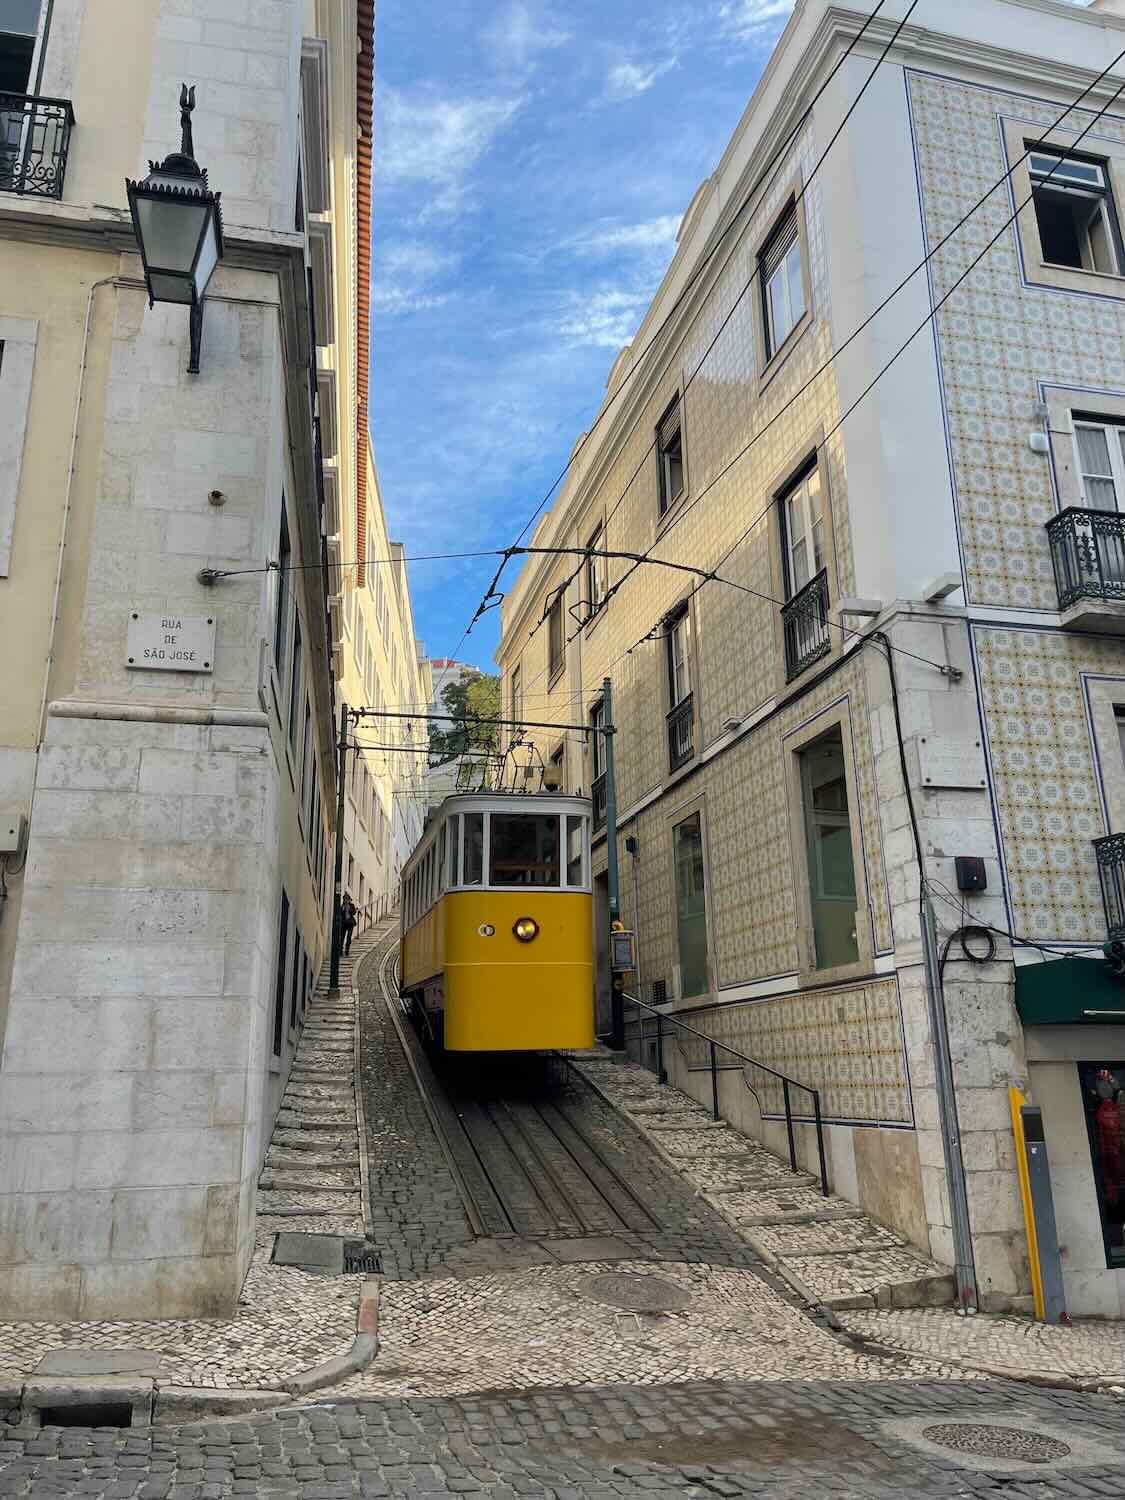 A classic yellow tram ascends a steep, cobbled street in Lisbon, framed by traditional tiled buildings under a clear blue sky, capturing the essence of the city's historic charm.